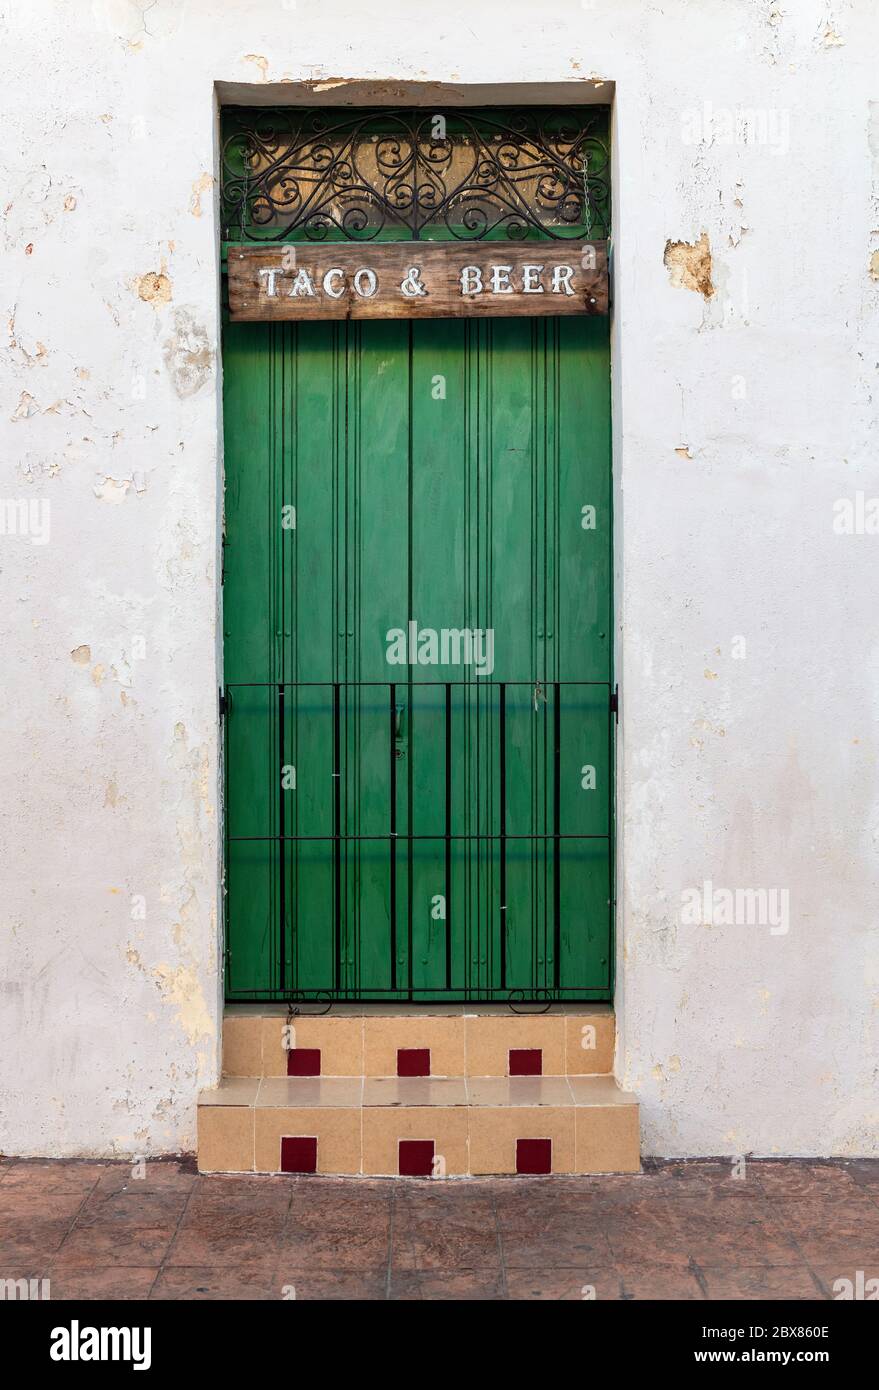 White colonial style facade with green metallic door and a "Taco and Beer" sign, Campeche, Mexico. Stock Photo